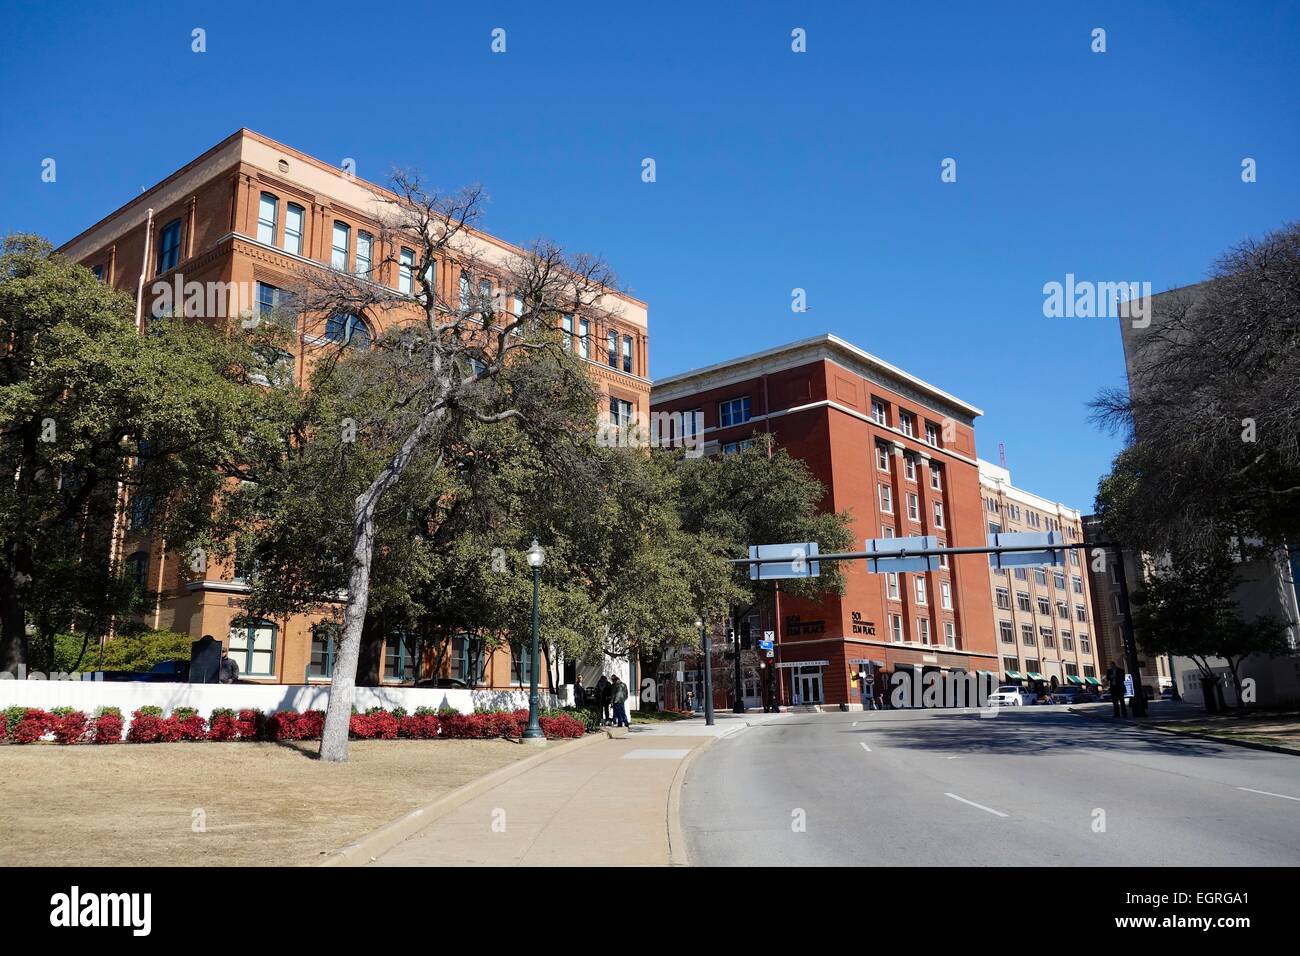 Dealey Plaza, Dallas Texas, site of JFK assassination. Texas School Book Depository Building at left. Stock Photo